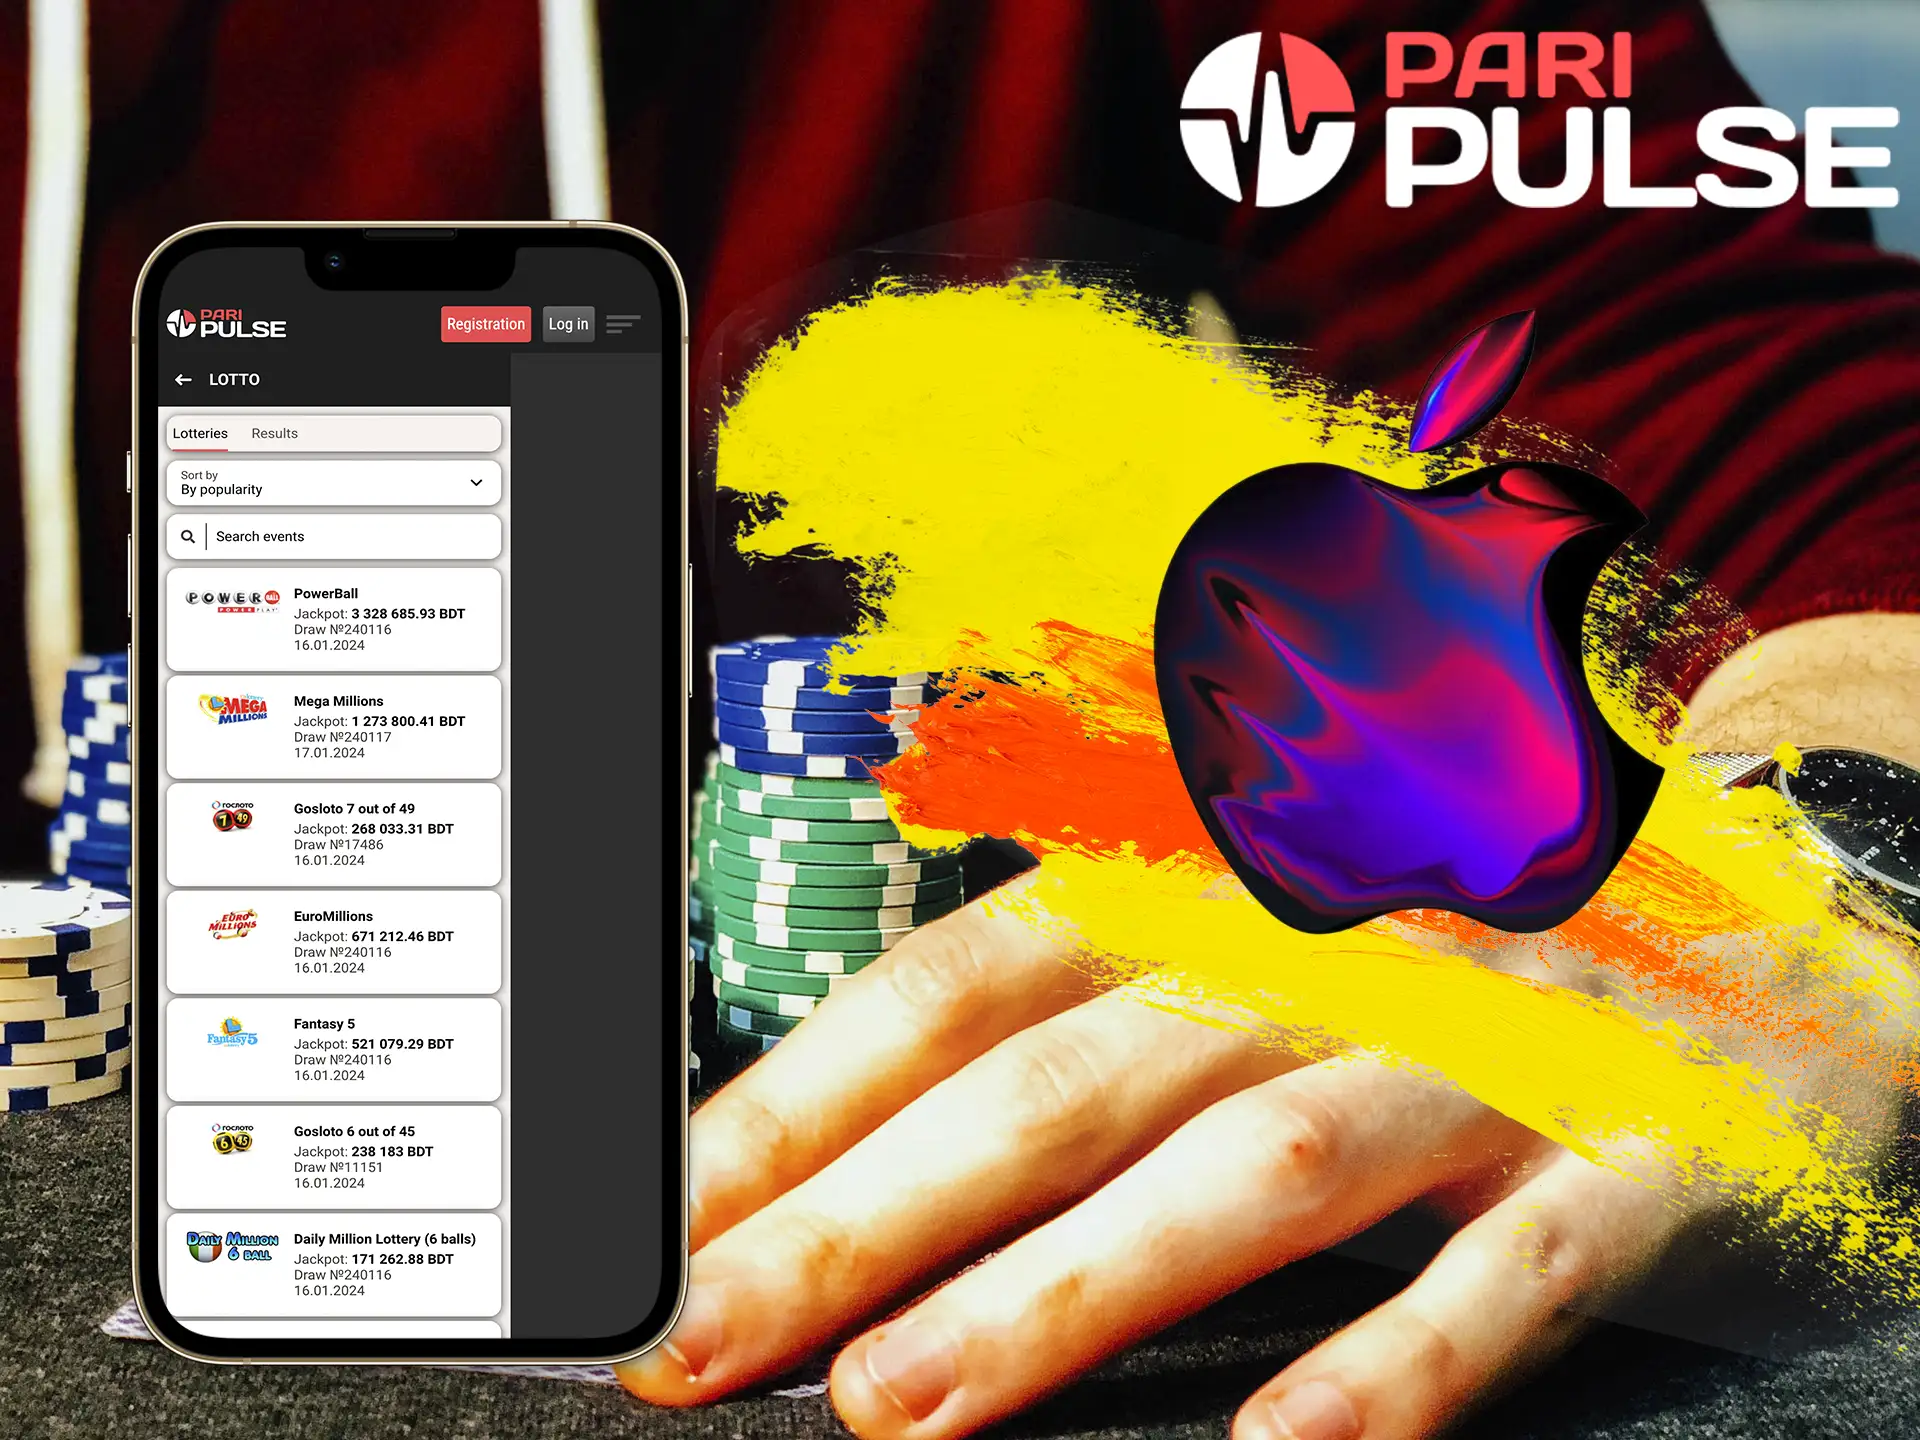 The PariPulse software for Apple provides an enjoyable experience for players, similar to the Android platform, and also runs faster.